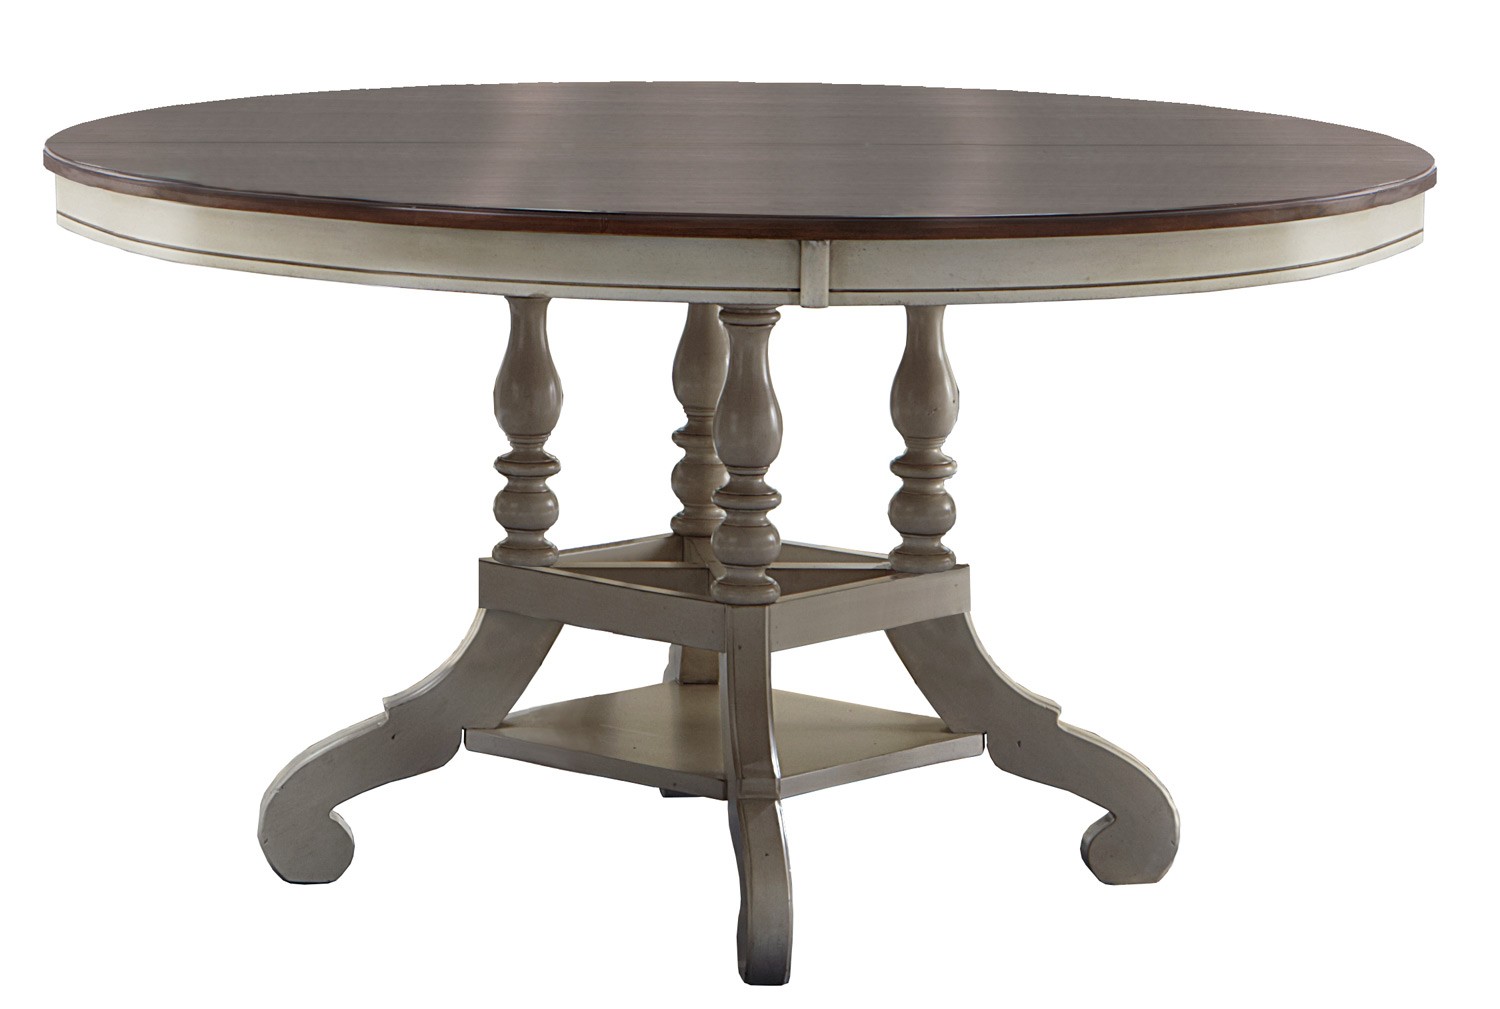 Hillsdale Pine Island Round Dining Table - Old White